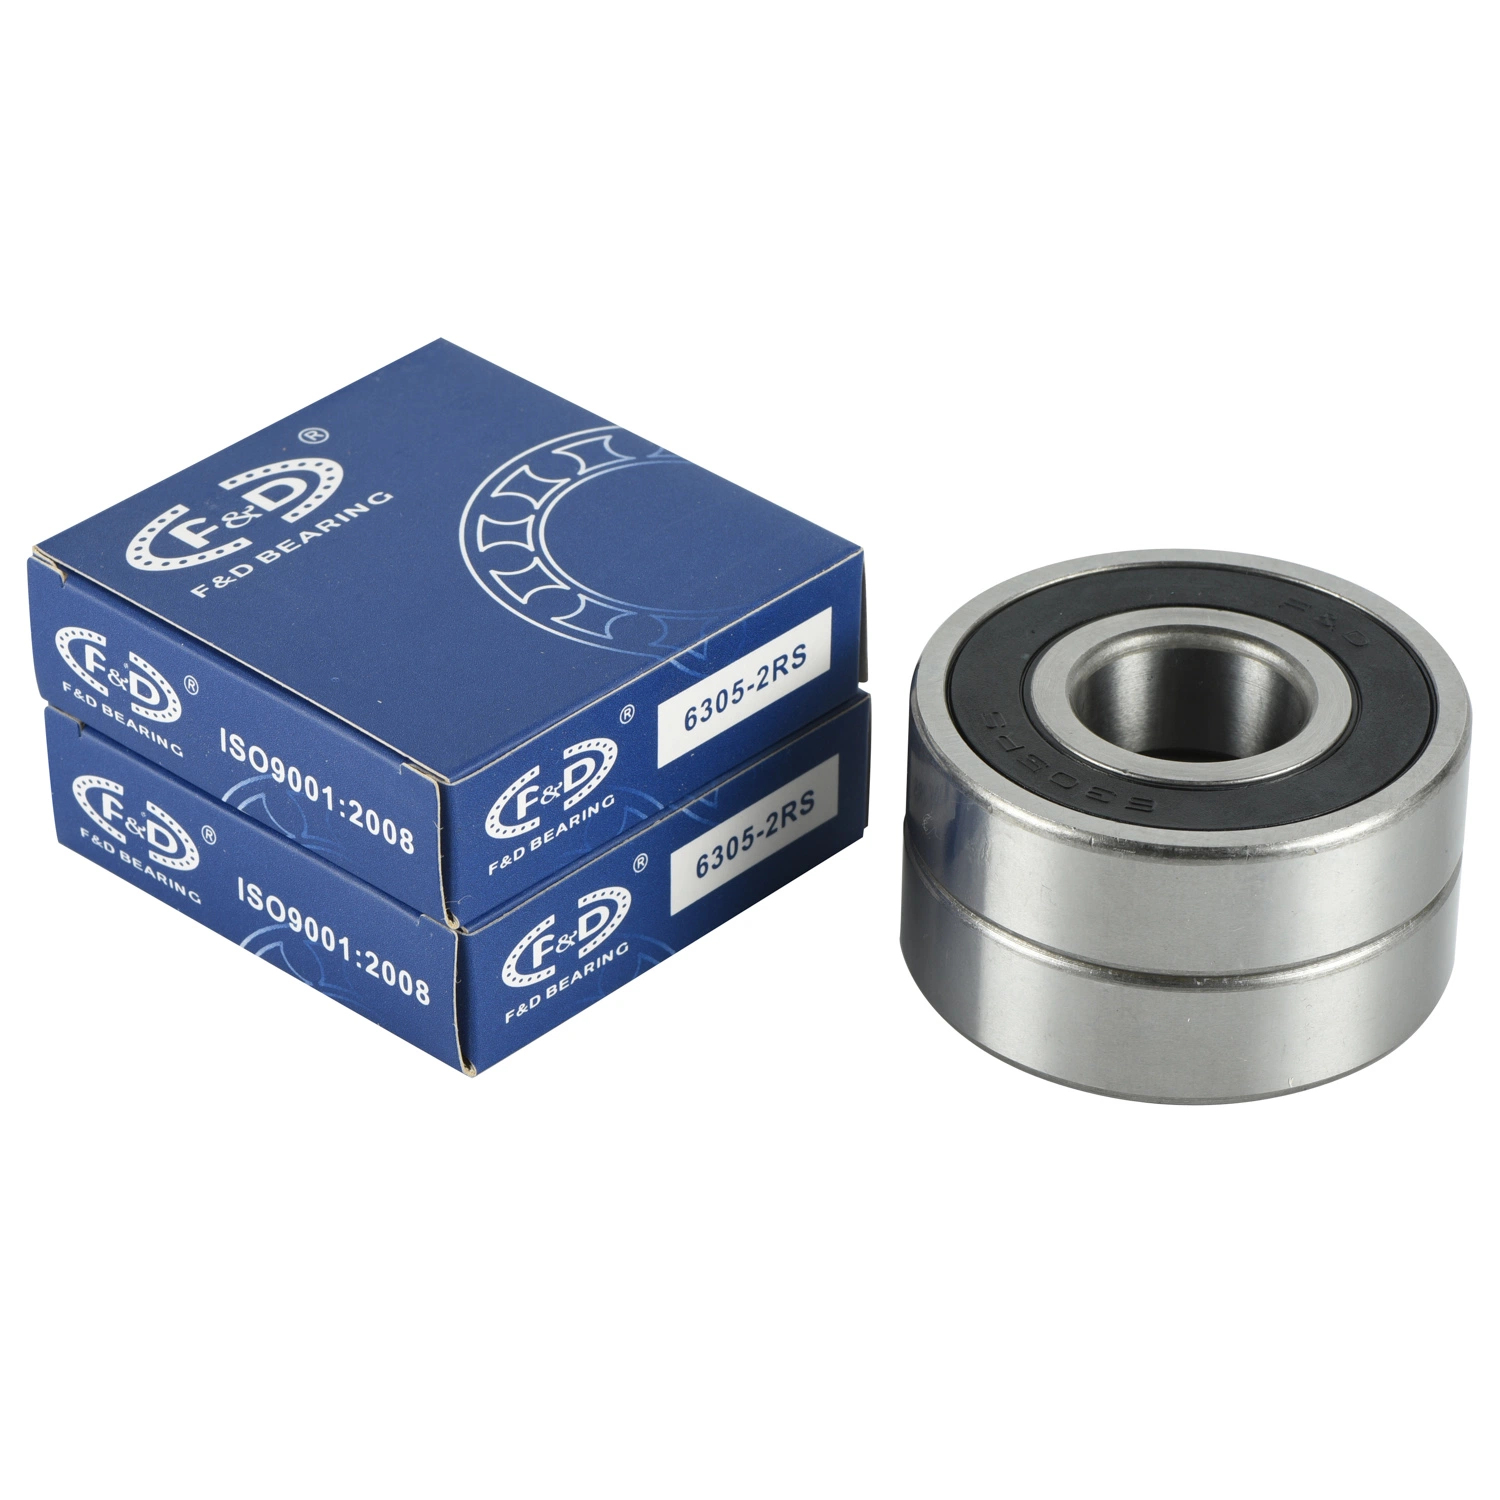 Roller bearing 6202zz for Vehicle/Auto/Motorcycle/Scooter/Bicycle Parts/Accessories